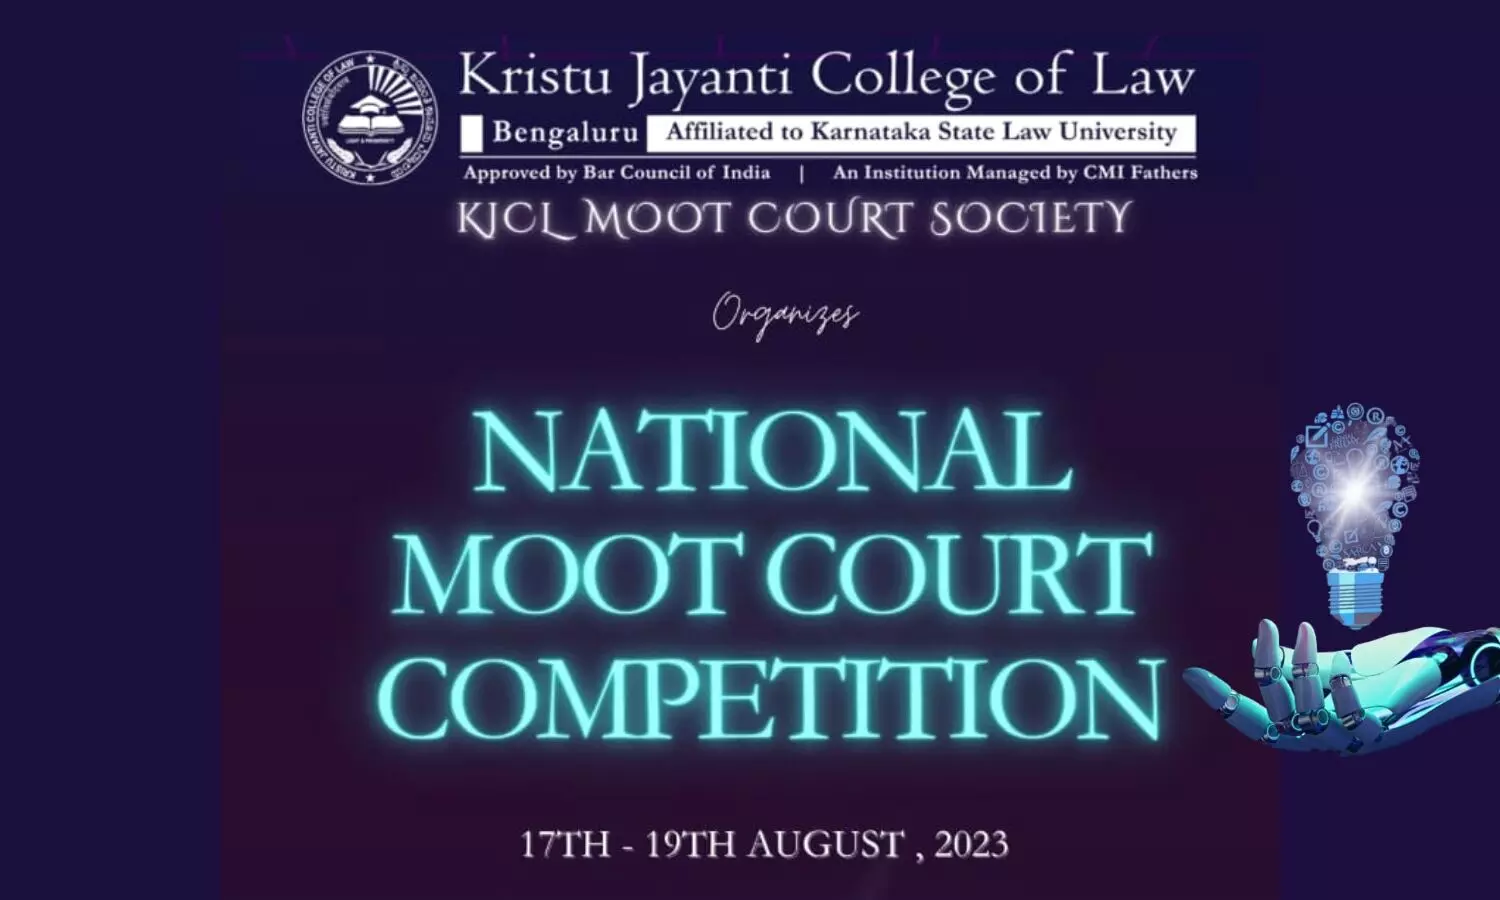 Kristu Jayanti College of Law National Moot Court Competition 2023